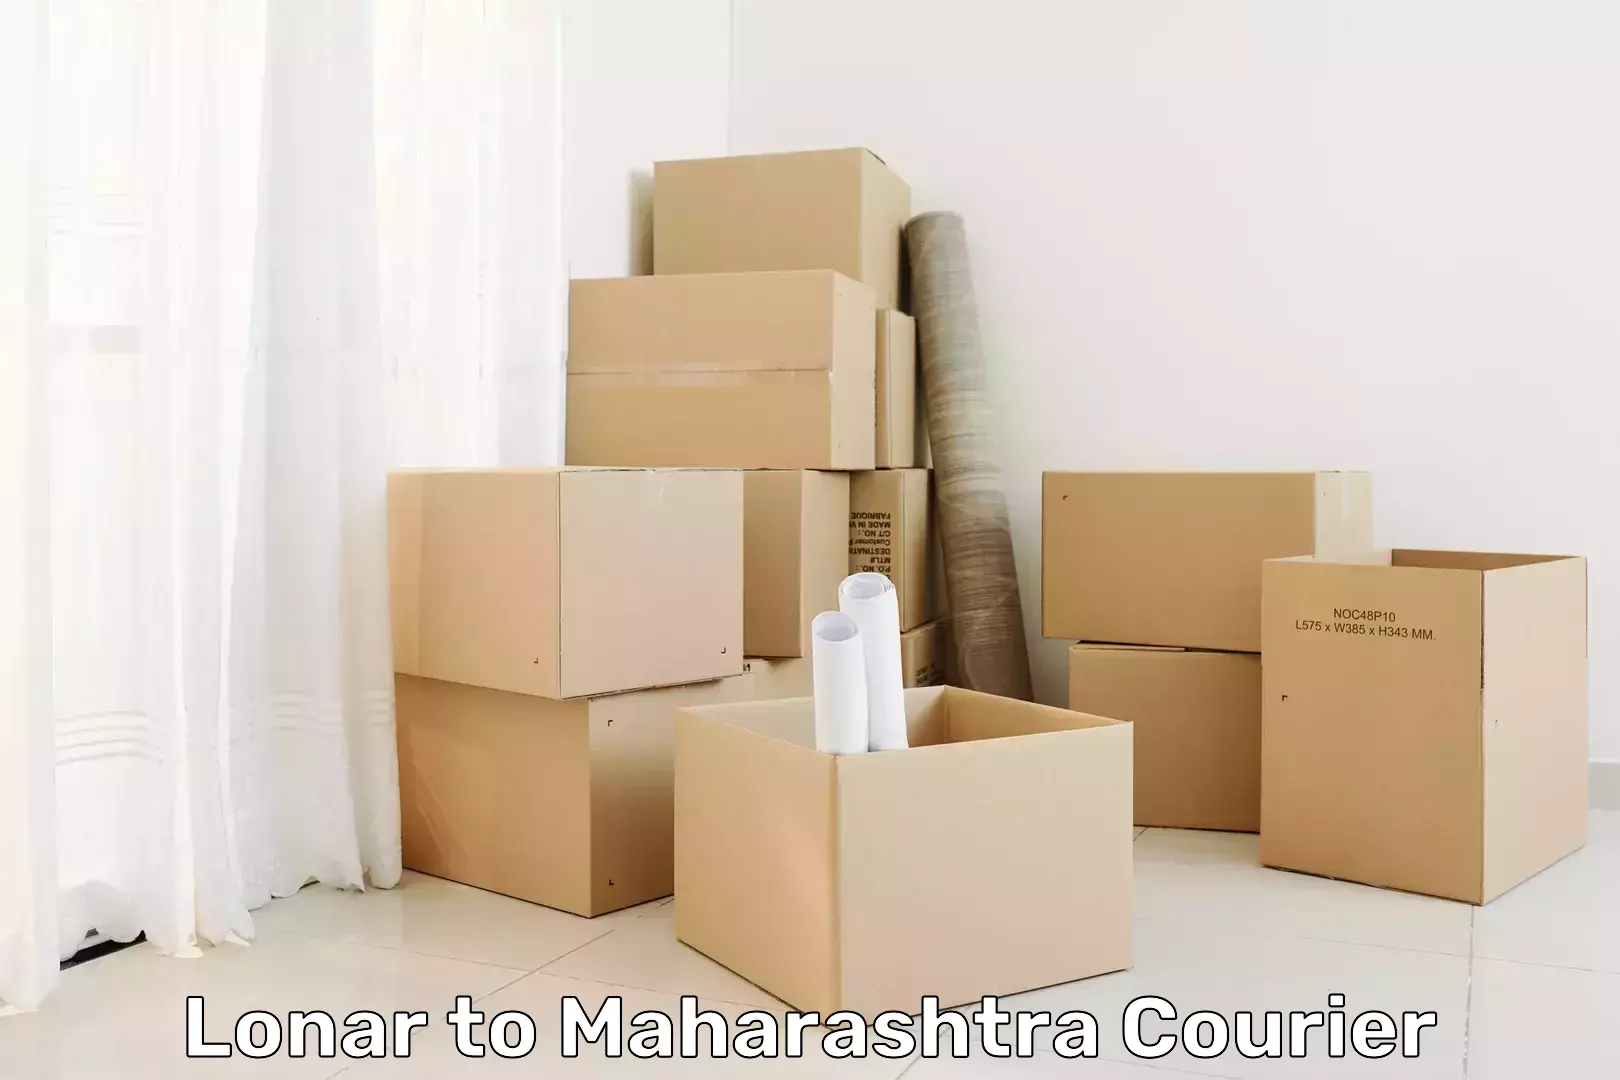 Reliable freight solutions in Lonar to Nashik